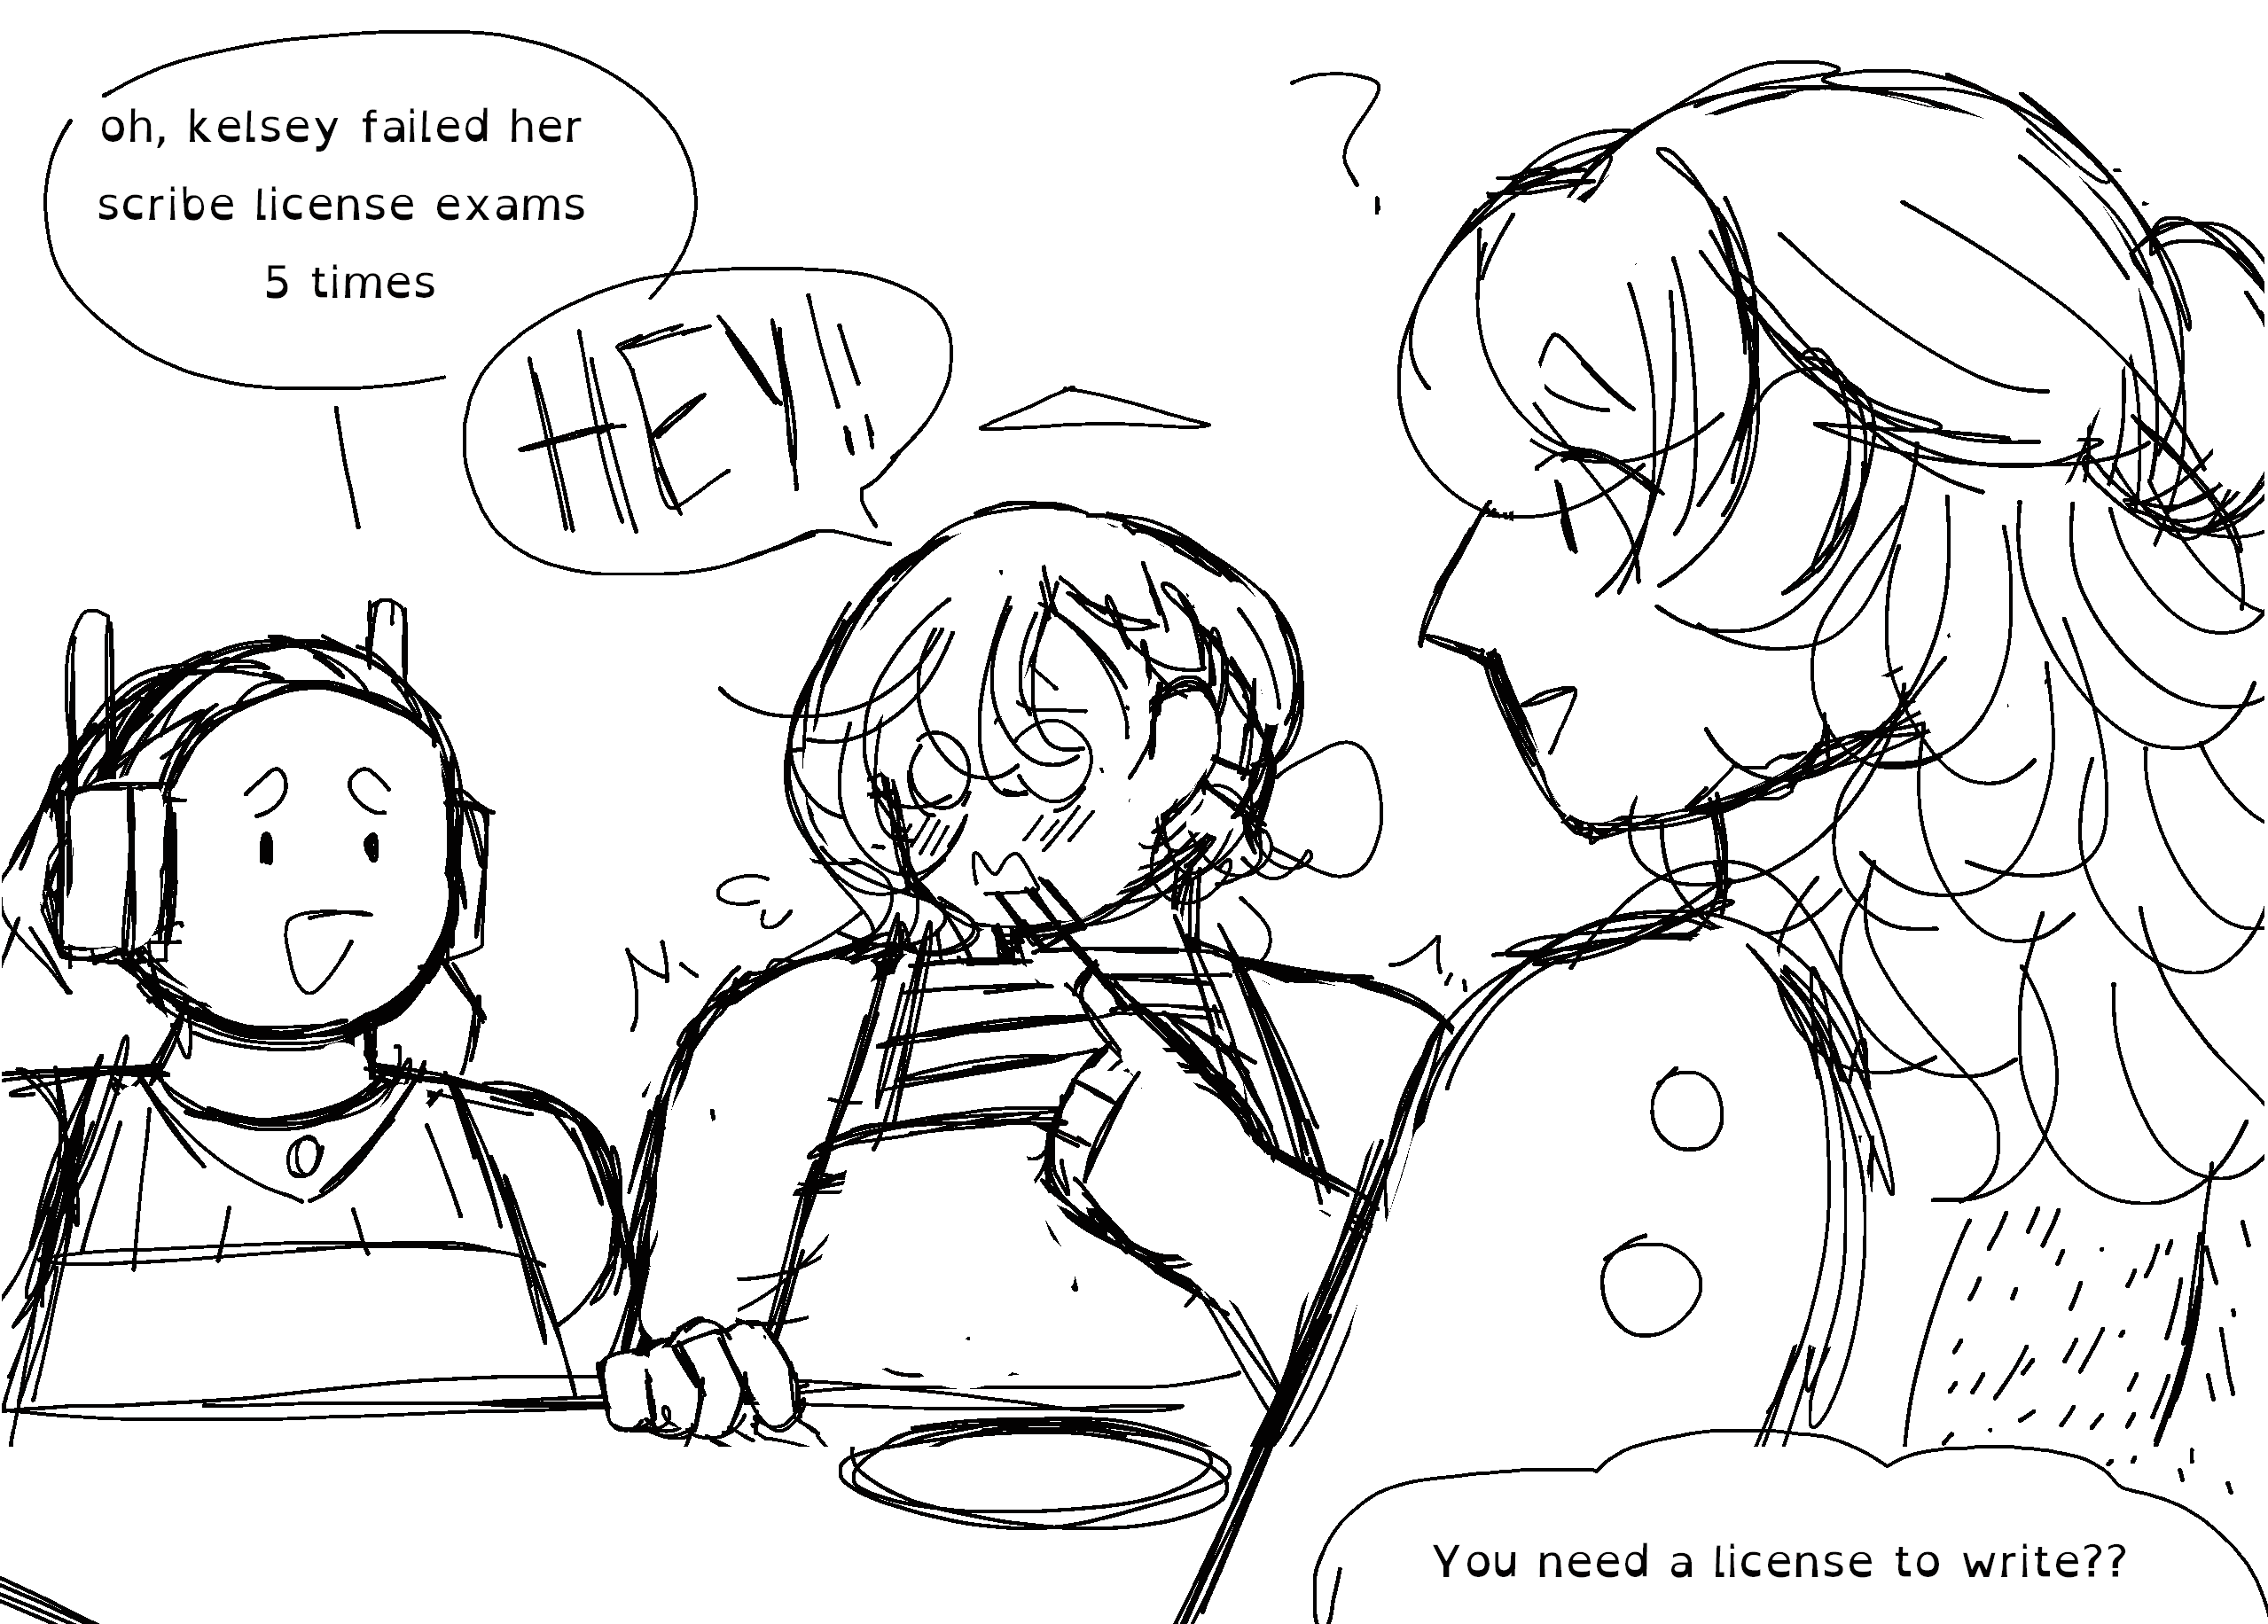 a sketch of Dawn, Kelseyana, and Zelophehad sitting at a table, and just finished eating. Dawn tells Zelophehad that Kelseyana failed her scribe license exam. Kelseyana interjects with a 'hey' in all caps. While Zelophehad confusingly questions himself 'You need a license to write??'